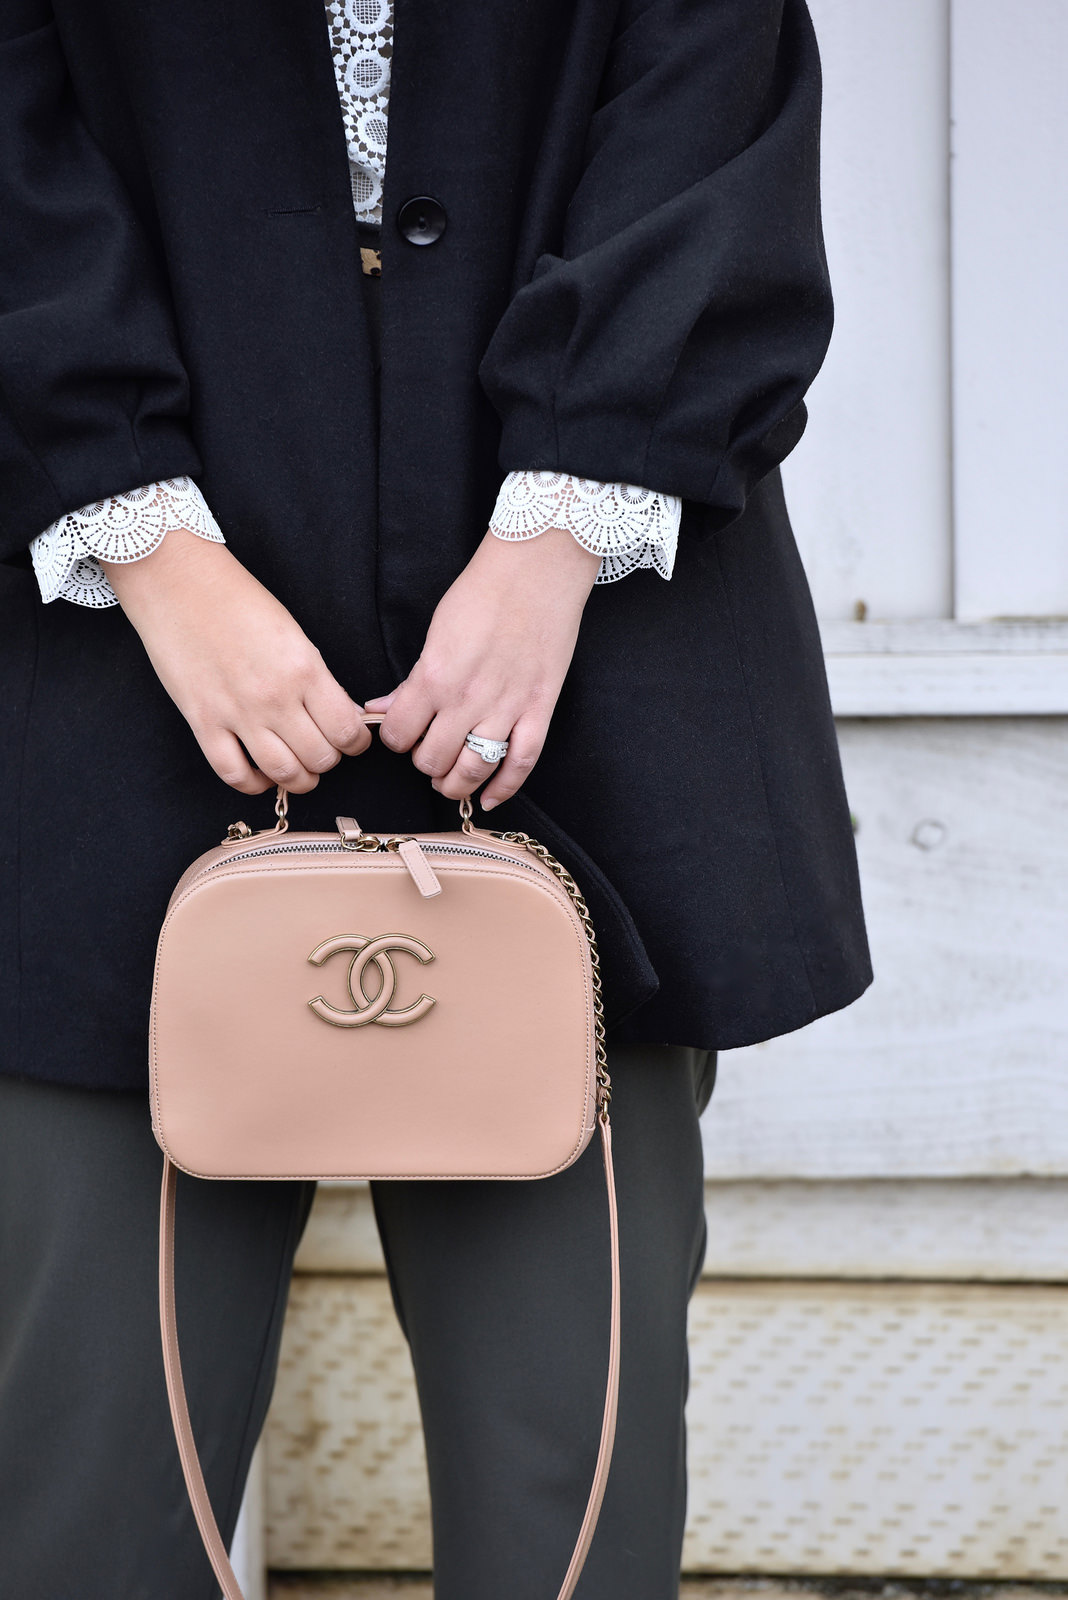 Girl with Curves blogger Tanesha Awasthi holding a Chanel Purse.